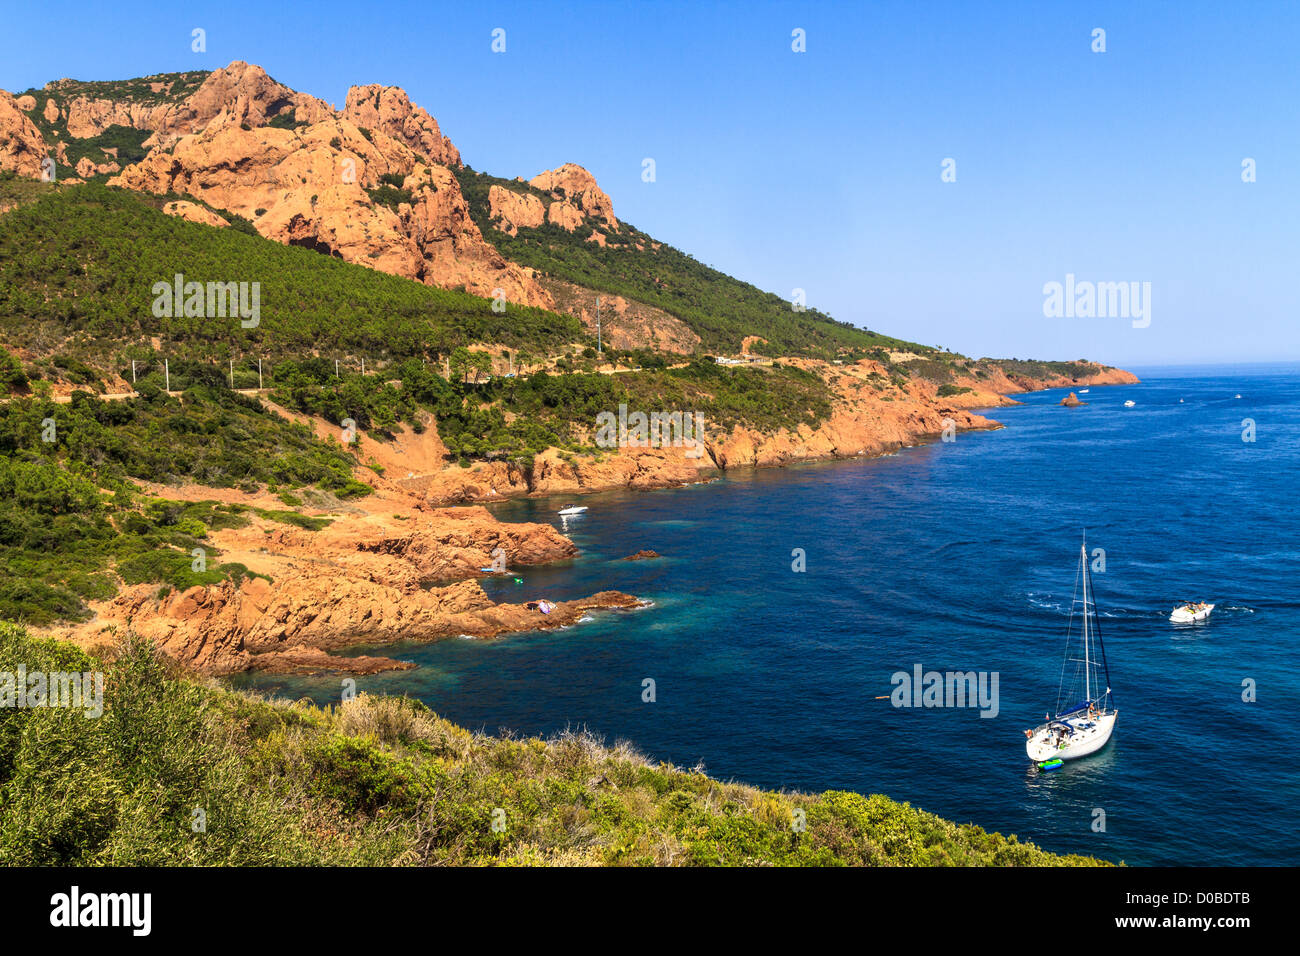 Beautiful Scenic Coastline on the French Riviera near Cannes, France Stock Photo